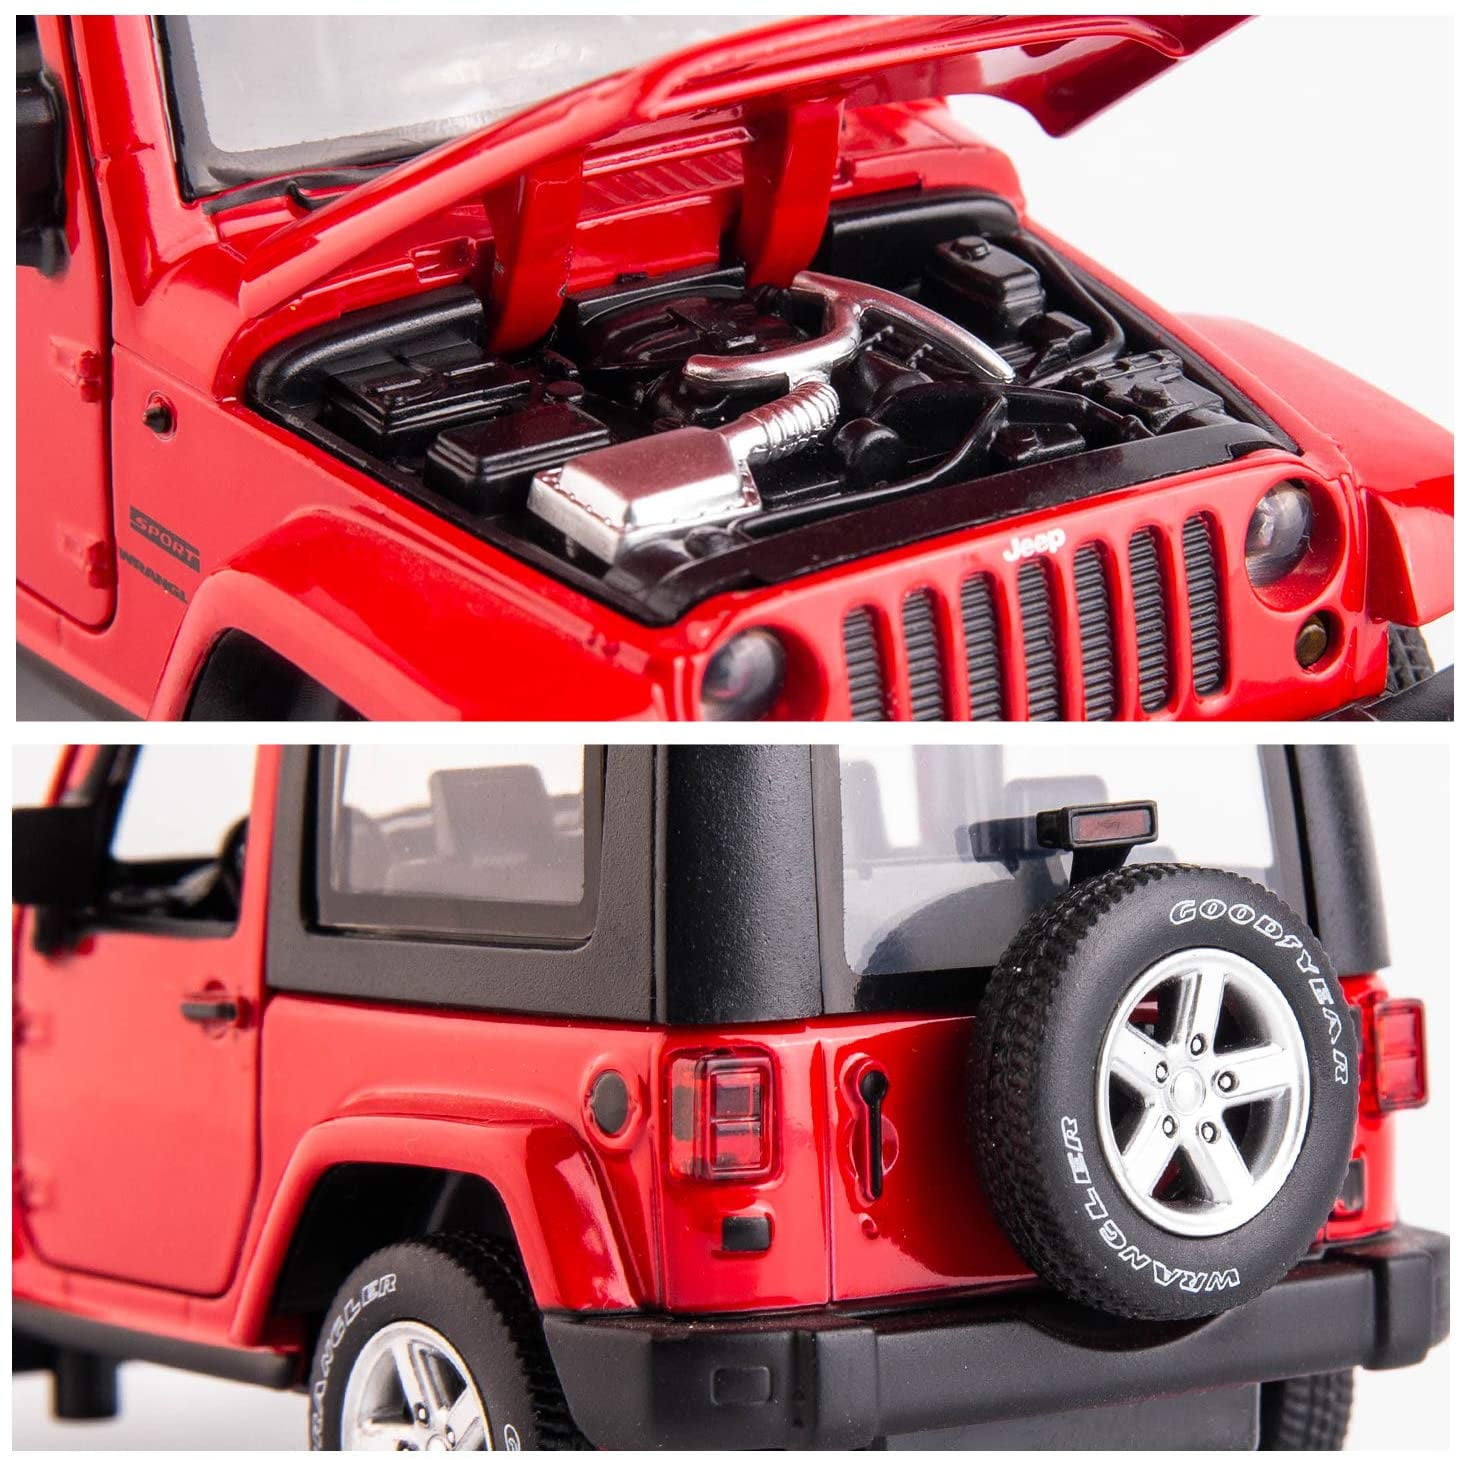 Jeep Wrangler Sahara Rubicon 1:32 Model Car Diecast Gift Toy Vehicle Kids Red 